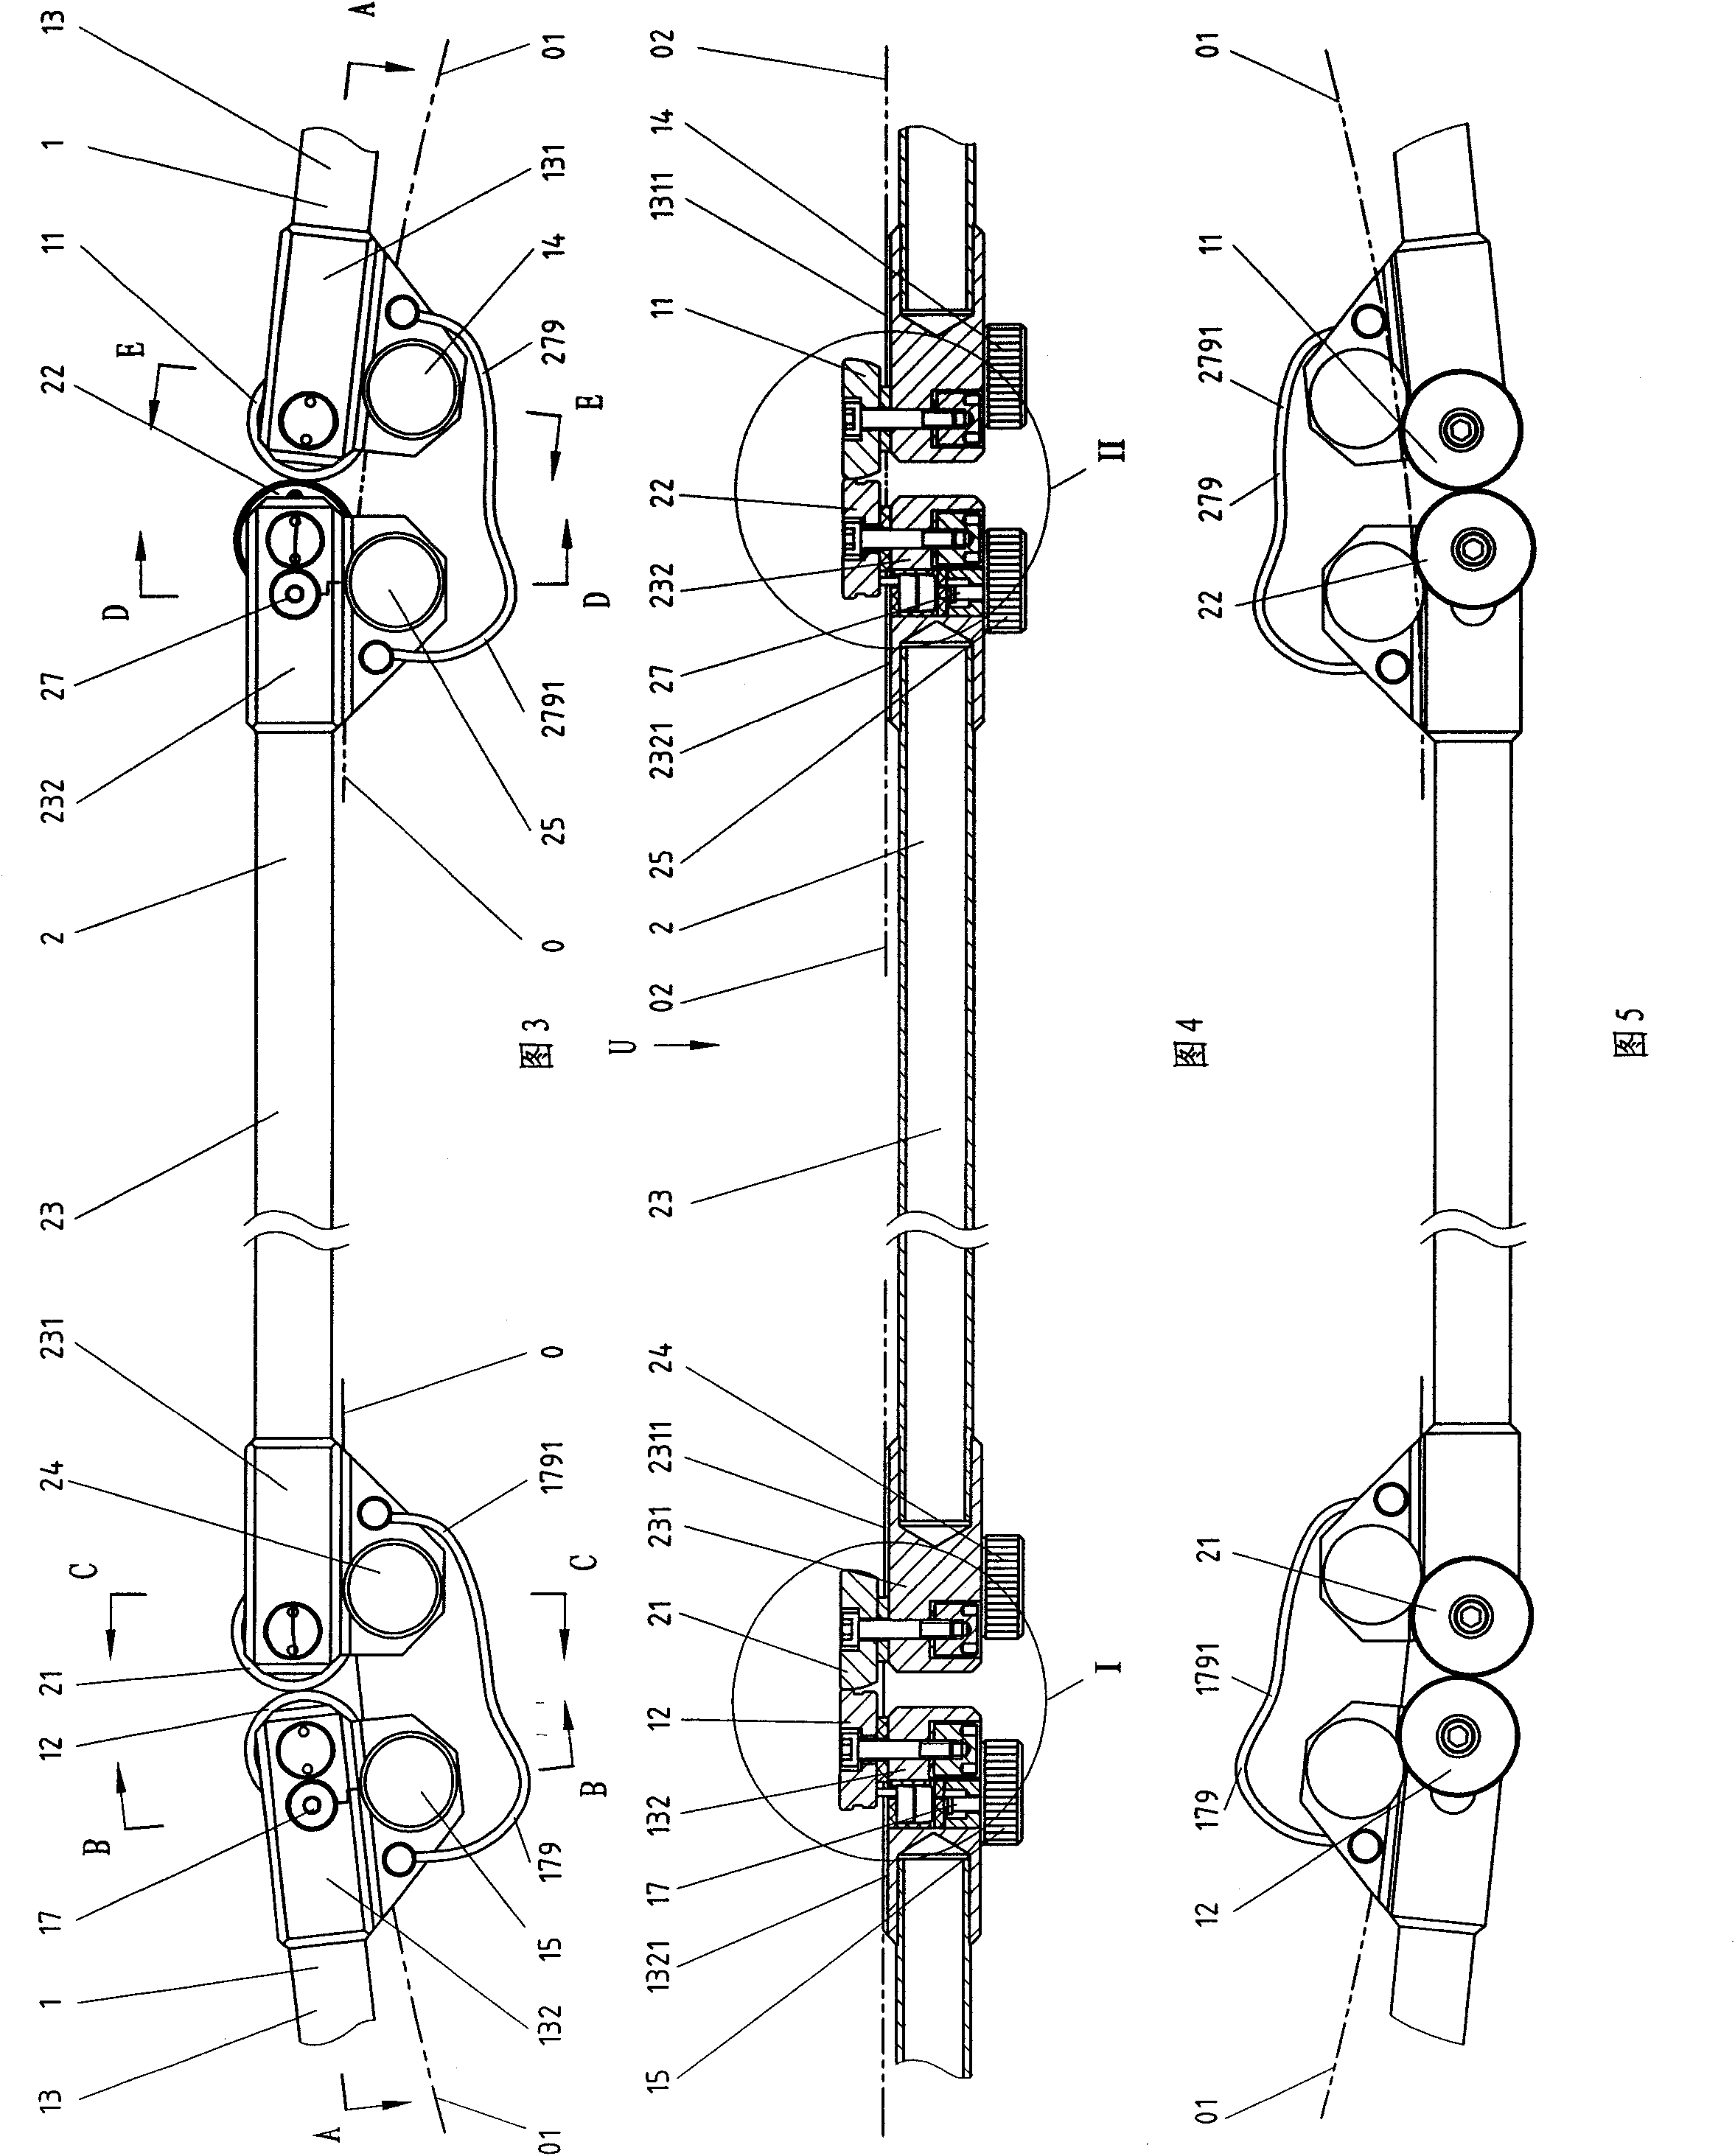 Contact indicating method based on insulated measuring unit pair on surface of measured object